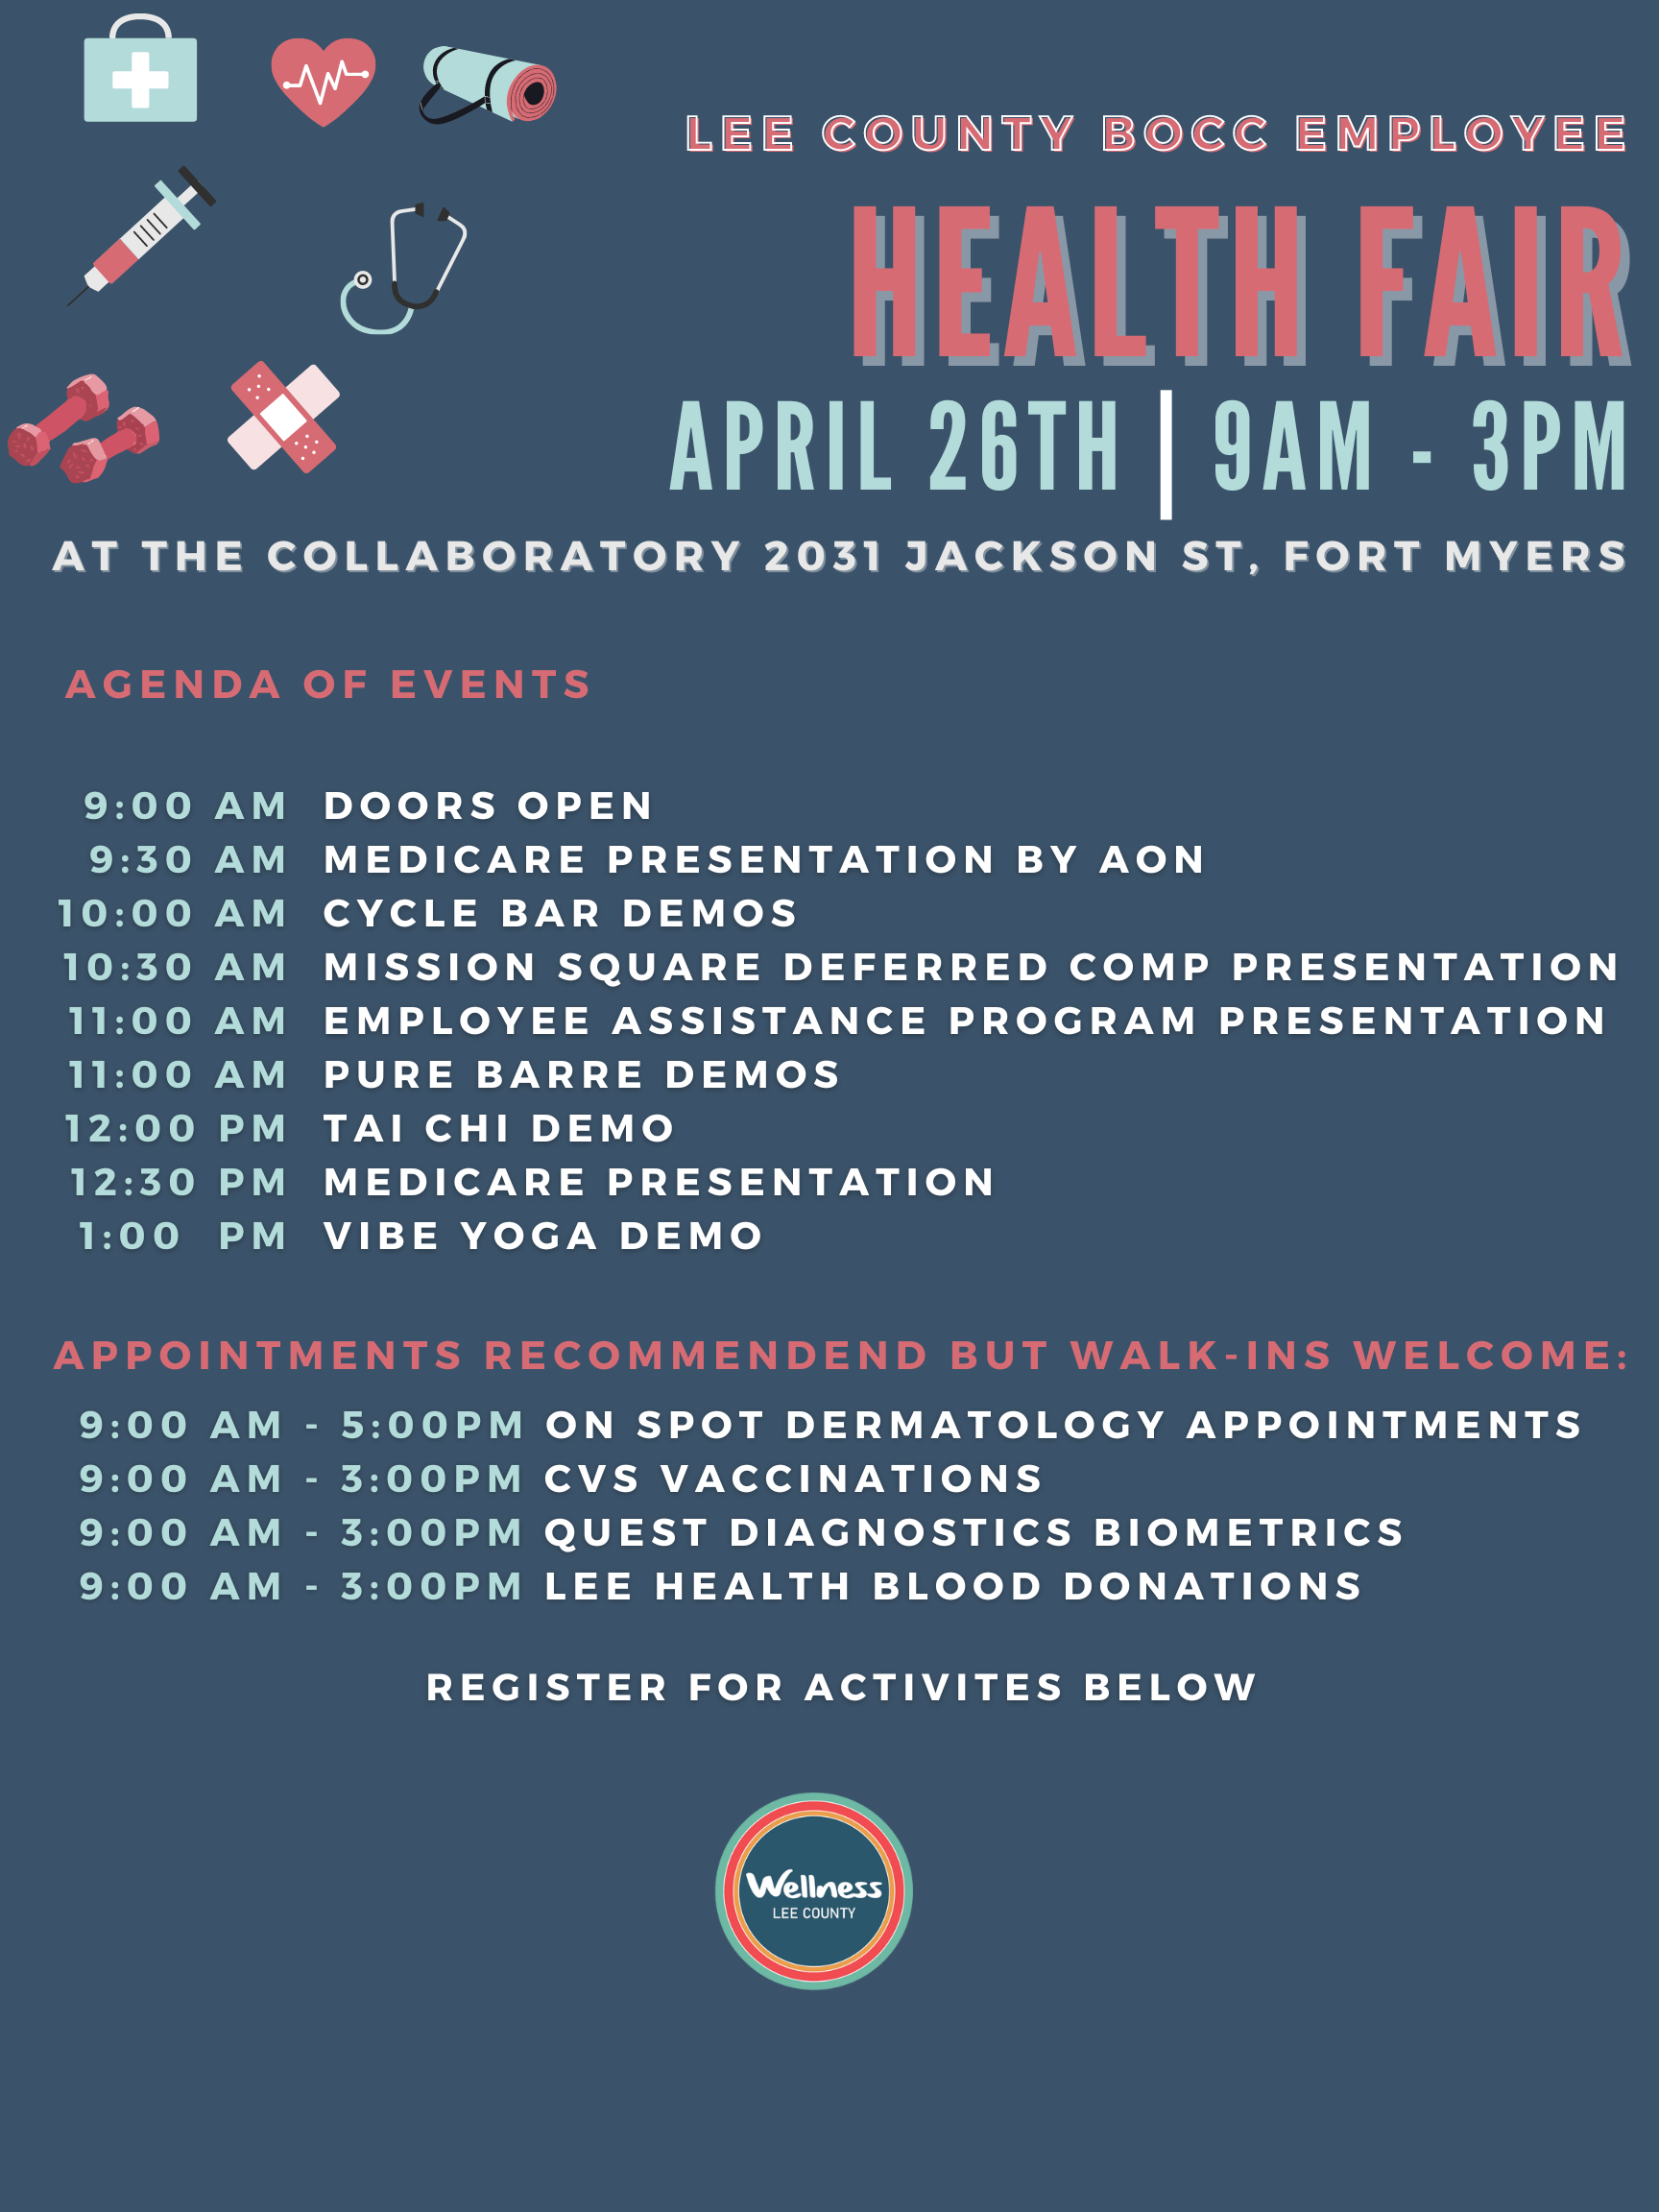 2023 Health Fair Agenda - April 26, 2023 from 9 AM to 3 PM at the Collaboratory. 2031 Jackson St., Fort Myers, FL 33901